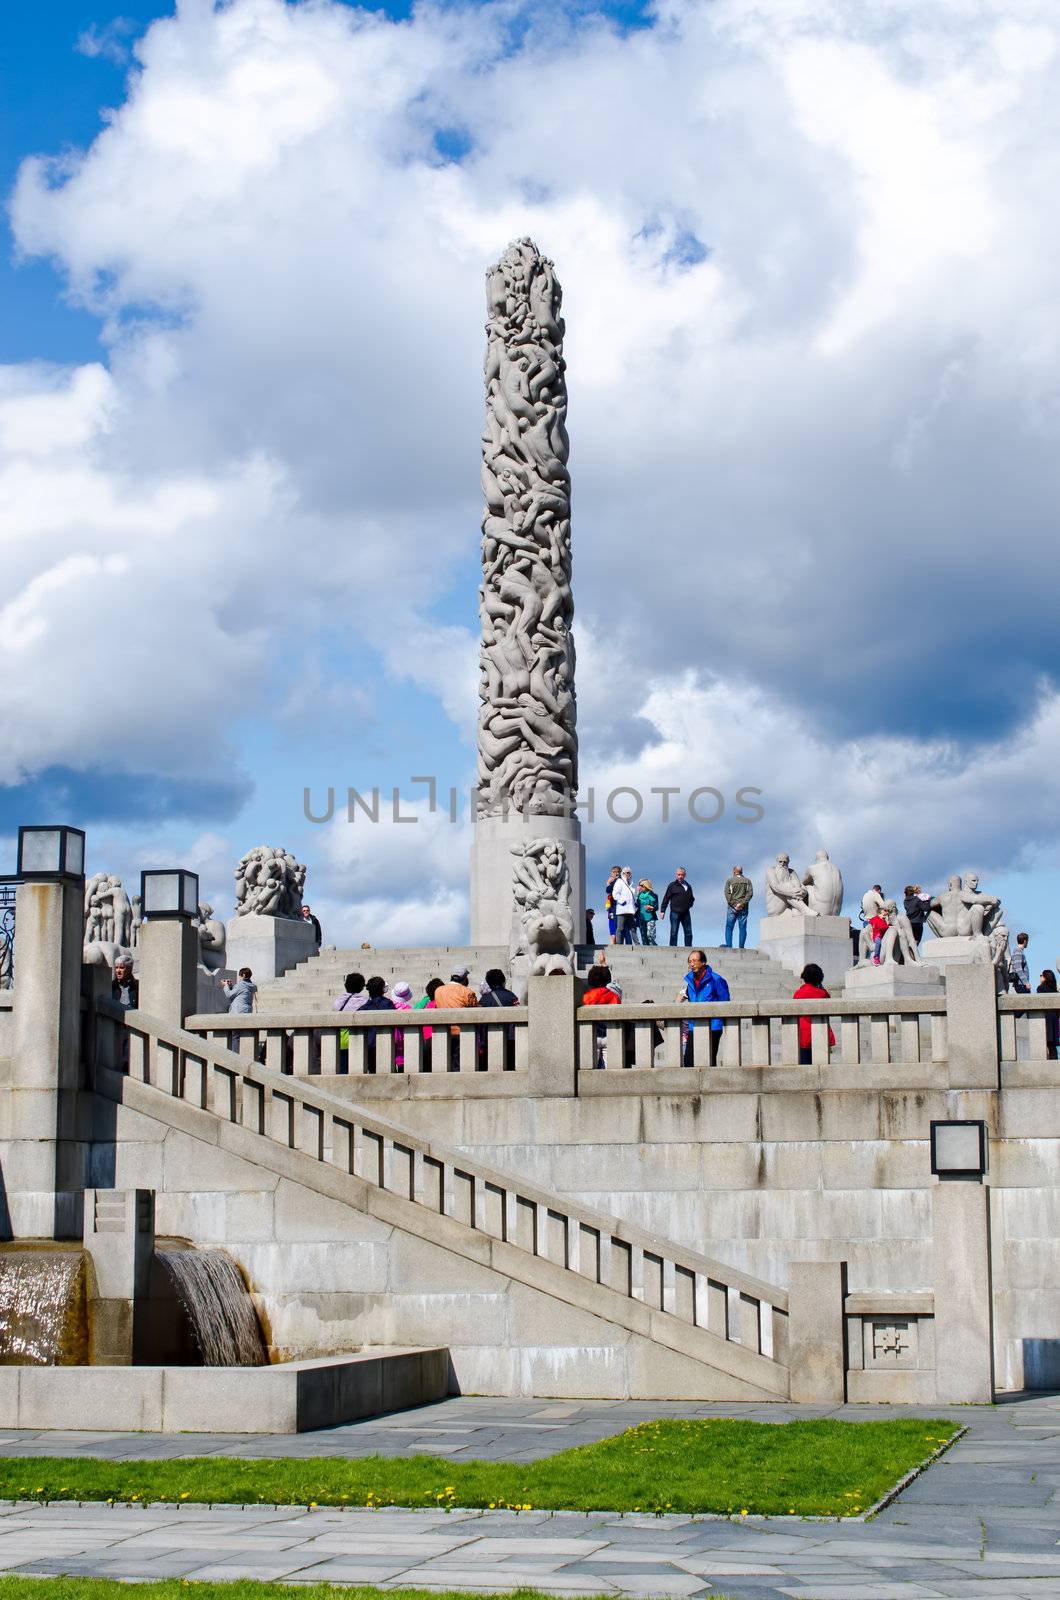 OSLO, NORWAY - MAY16: Visitors enjoying the statues created by Gustav Vigeland in the popular Vigeland park in Oslo, Norway on May 16,  2012